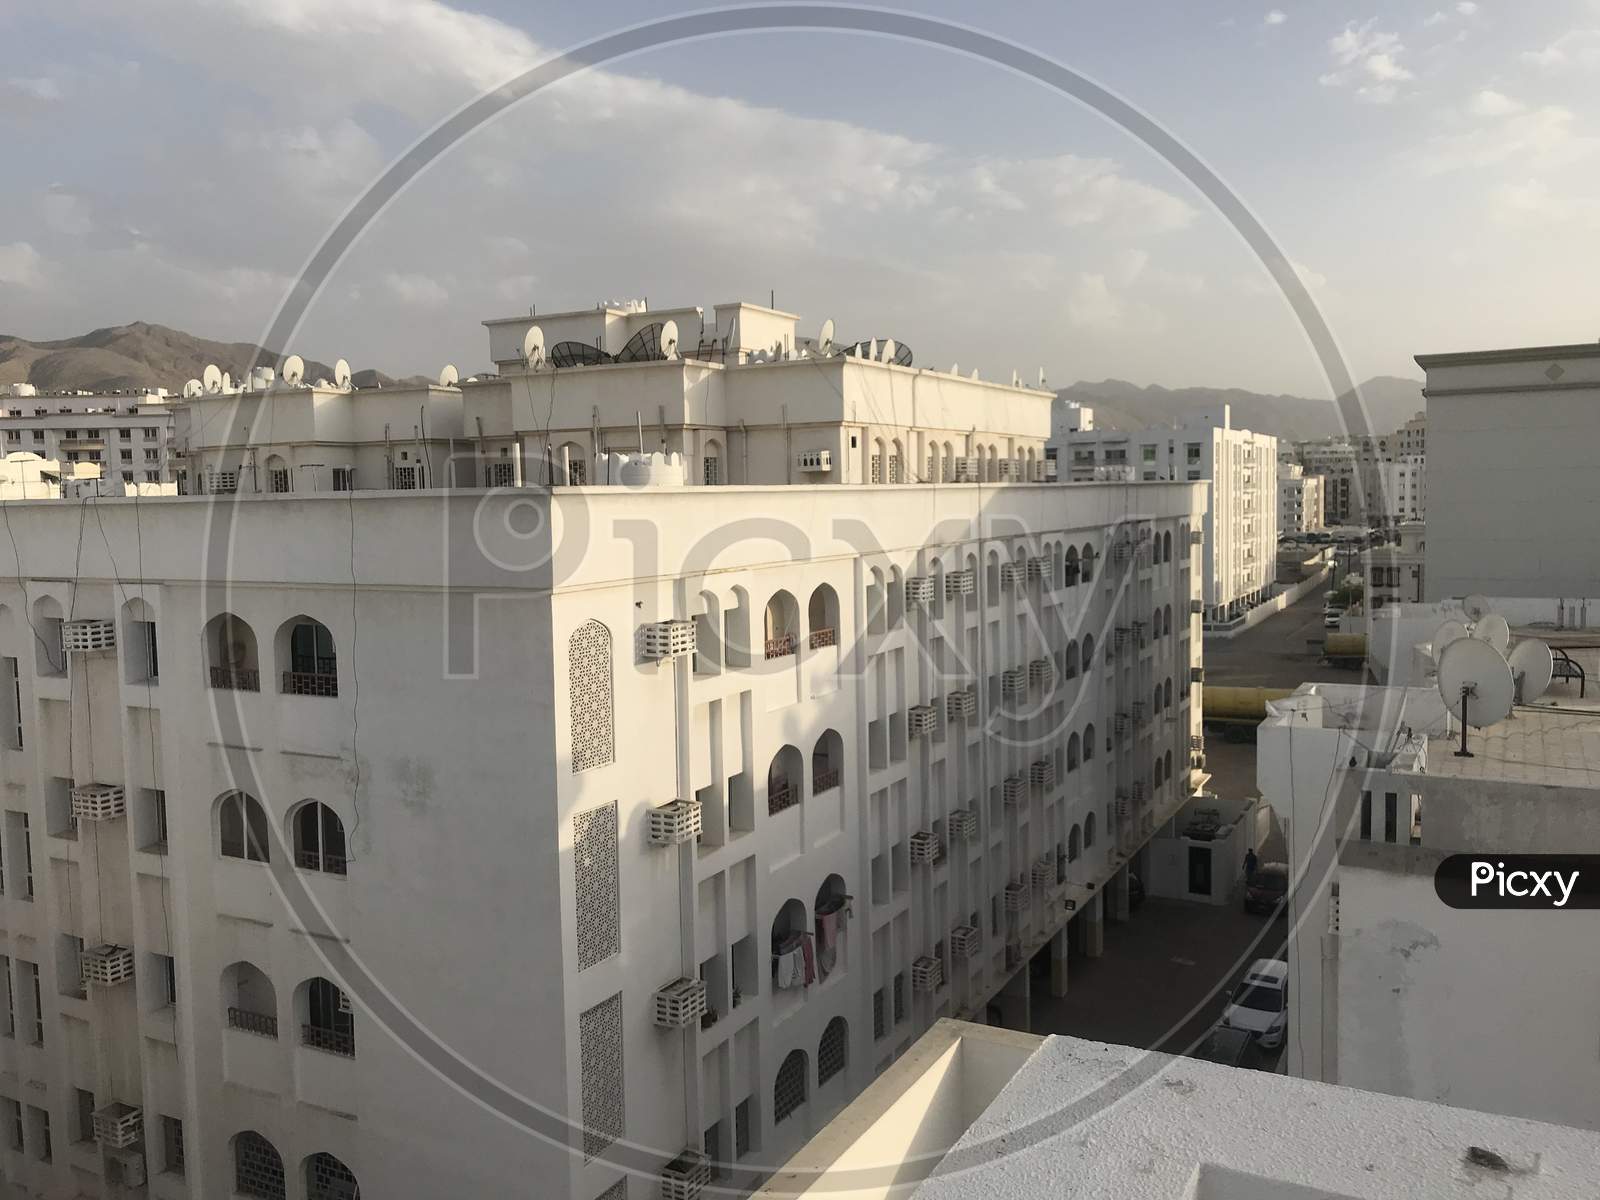 Muscat City Cityscape Of Residential Area Looks Empty Due To Corona Outbreak Virus Transmission So People Stay Home To Keep Them Safe From The Transmission